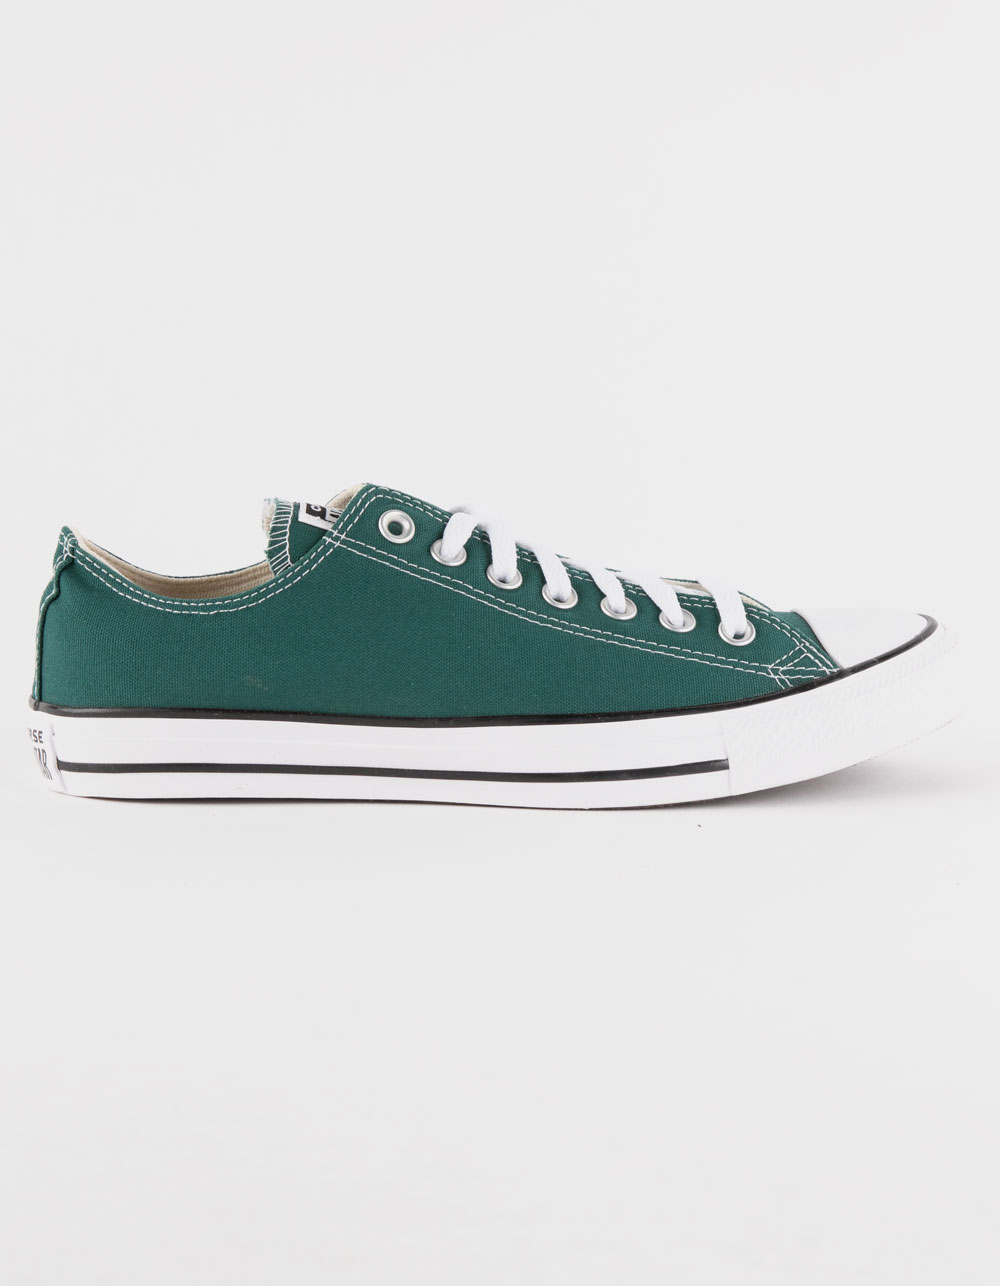 CONVERSE Chuck Taylor All Star Low Top Shoes - FOREST | Tillys